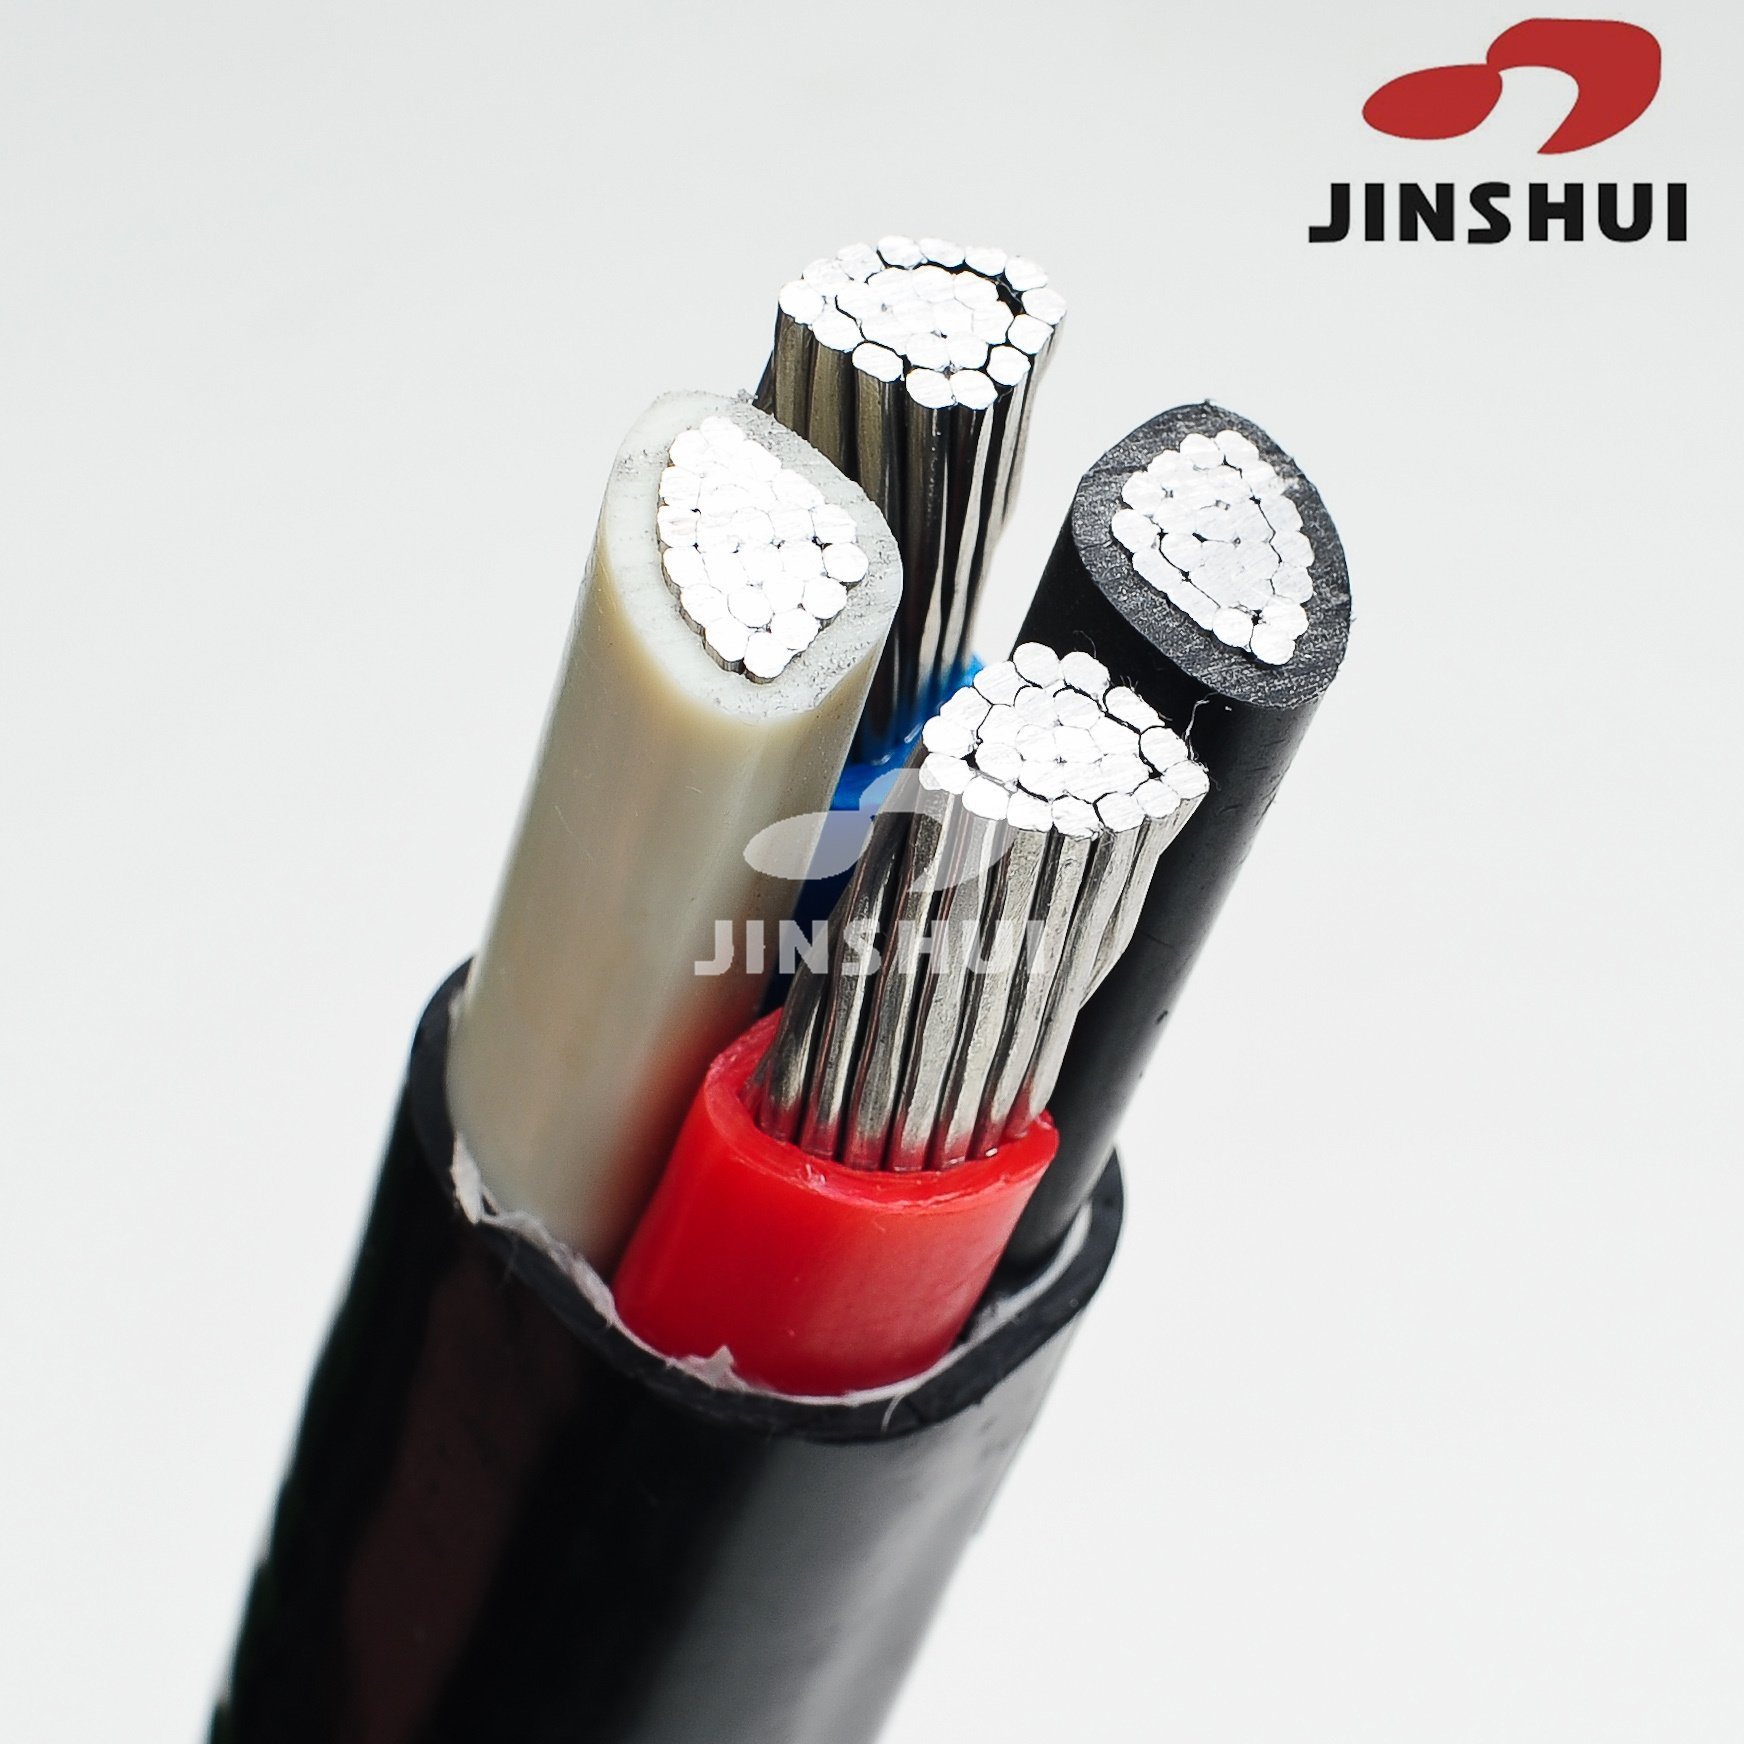 Yjv/Yjlv Medium and Low Voltage PVC/XLPE Sheathed Copper/Aluminum Core Electric Wire and Power Cable